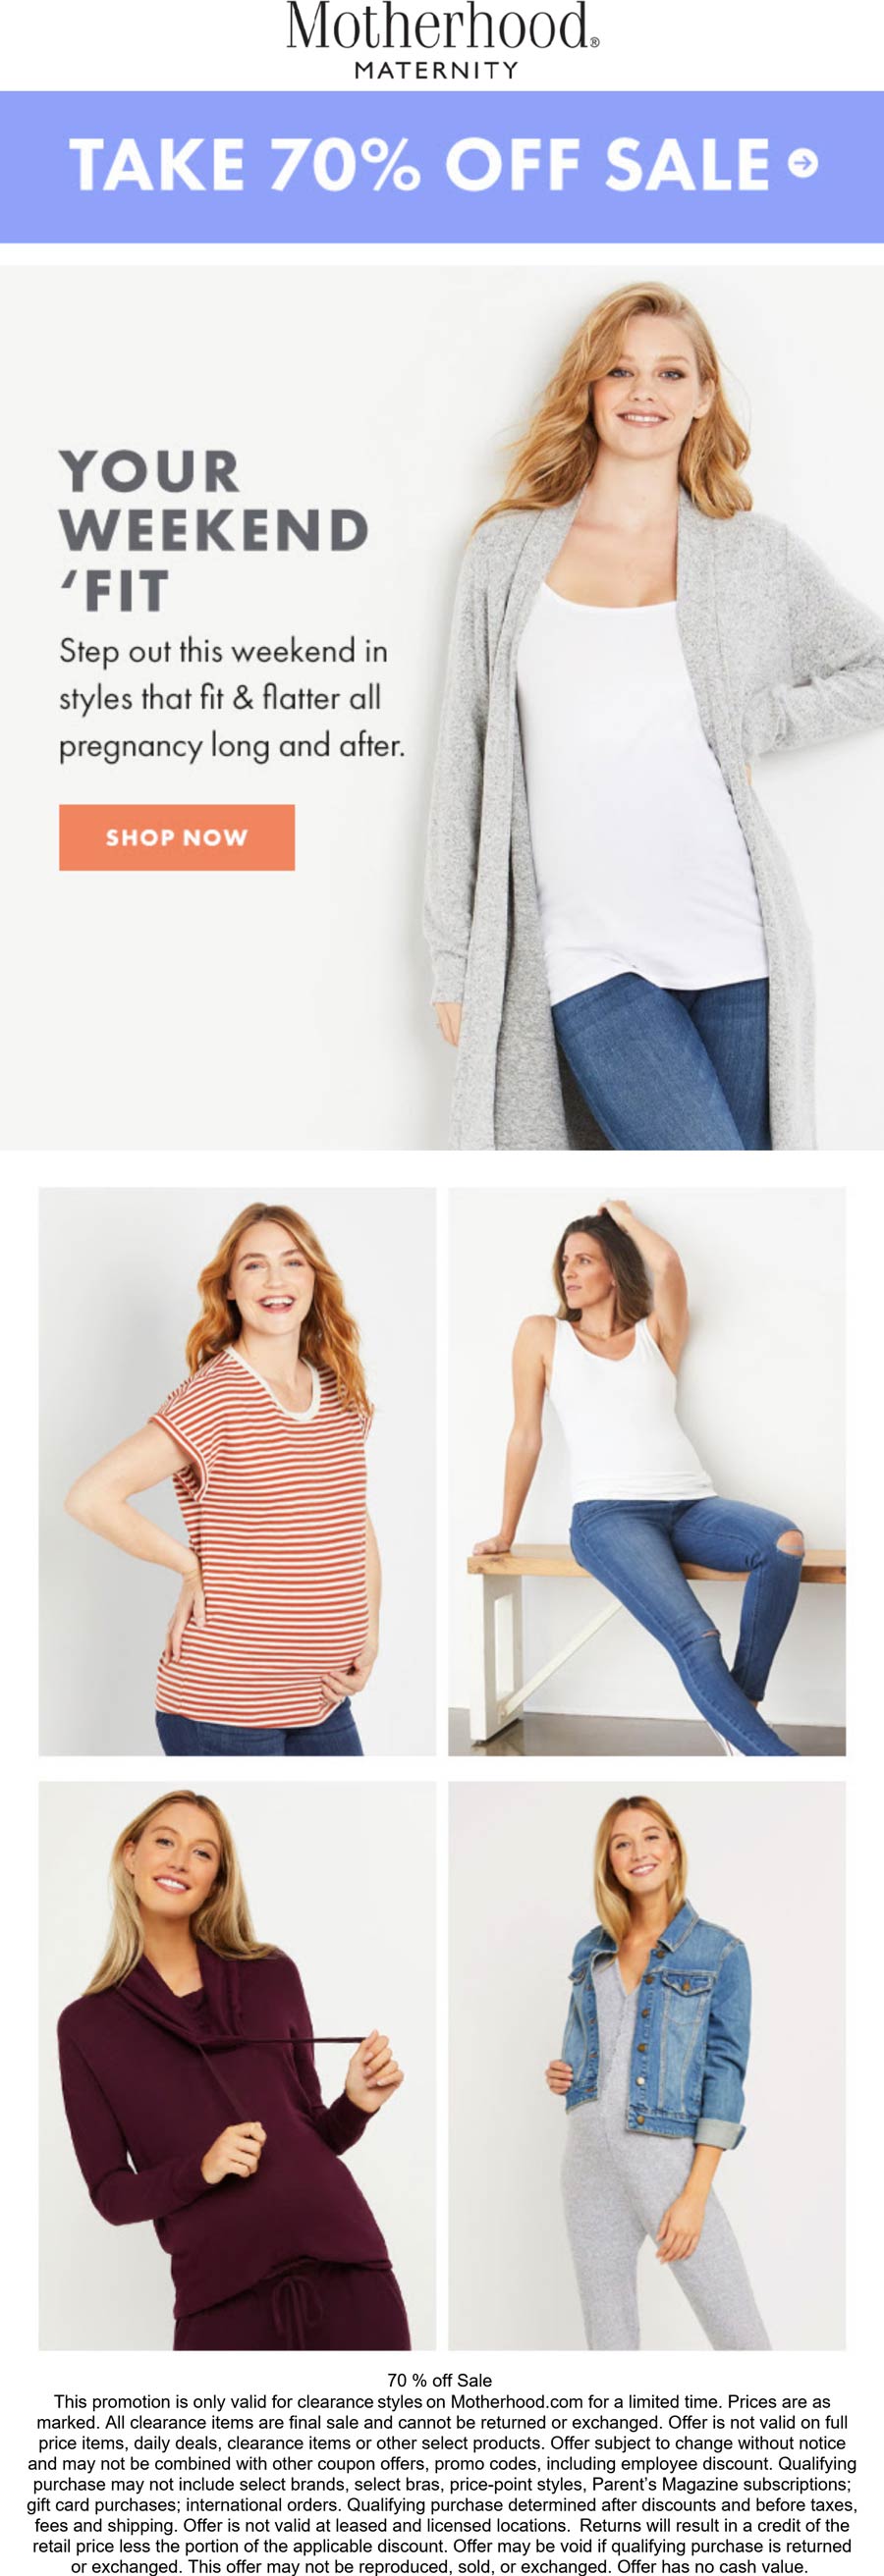 Motherhood Maternity stores Coupon  70% off sale items online at Motherhood Maternity #motherhoodmaternity 